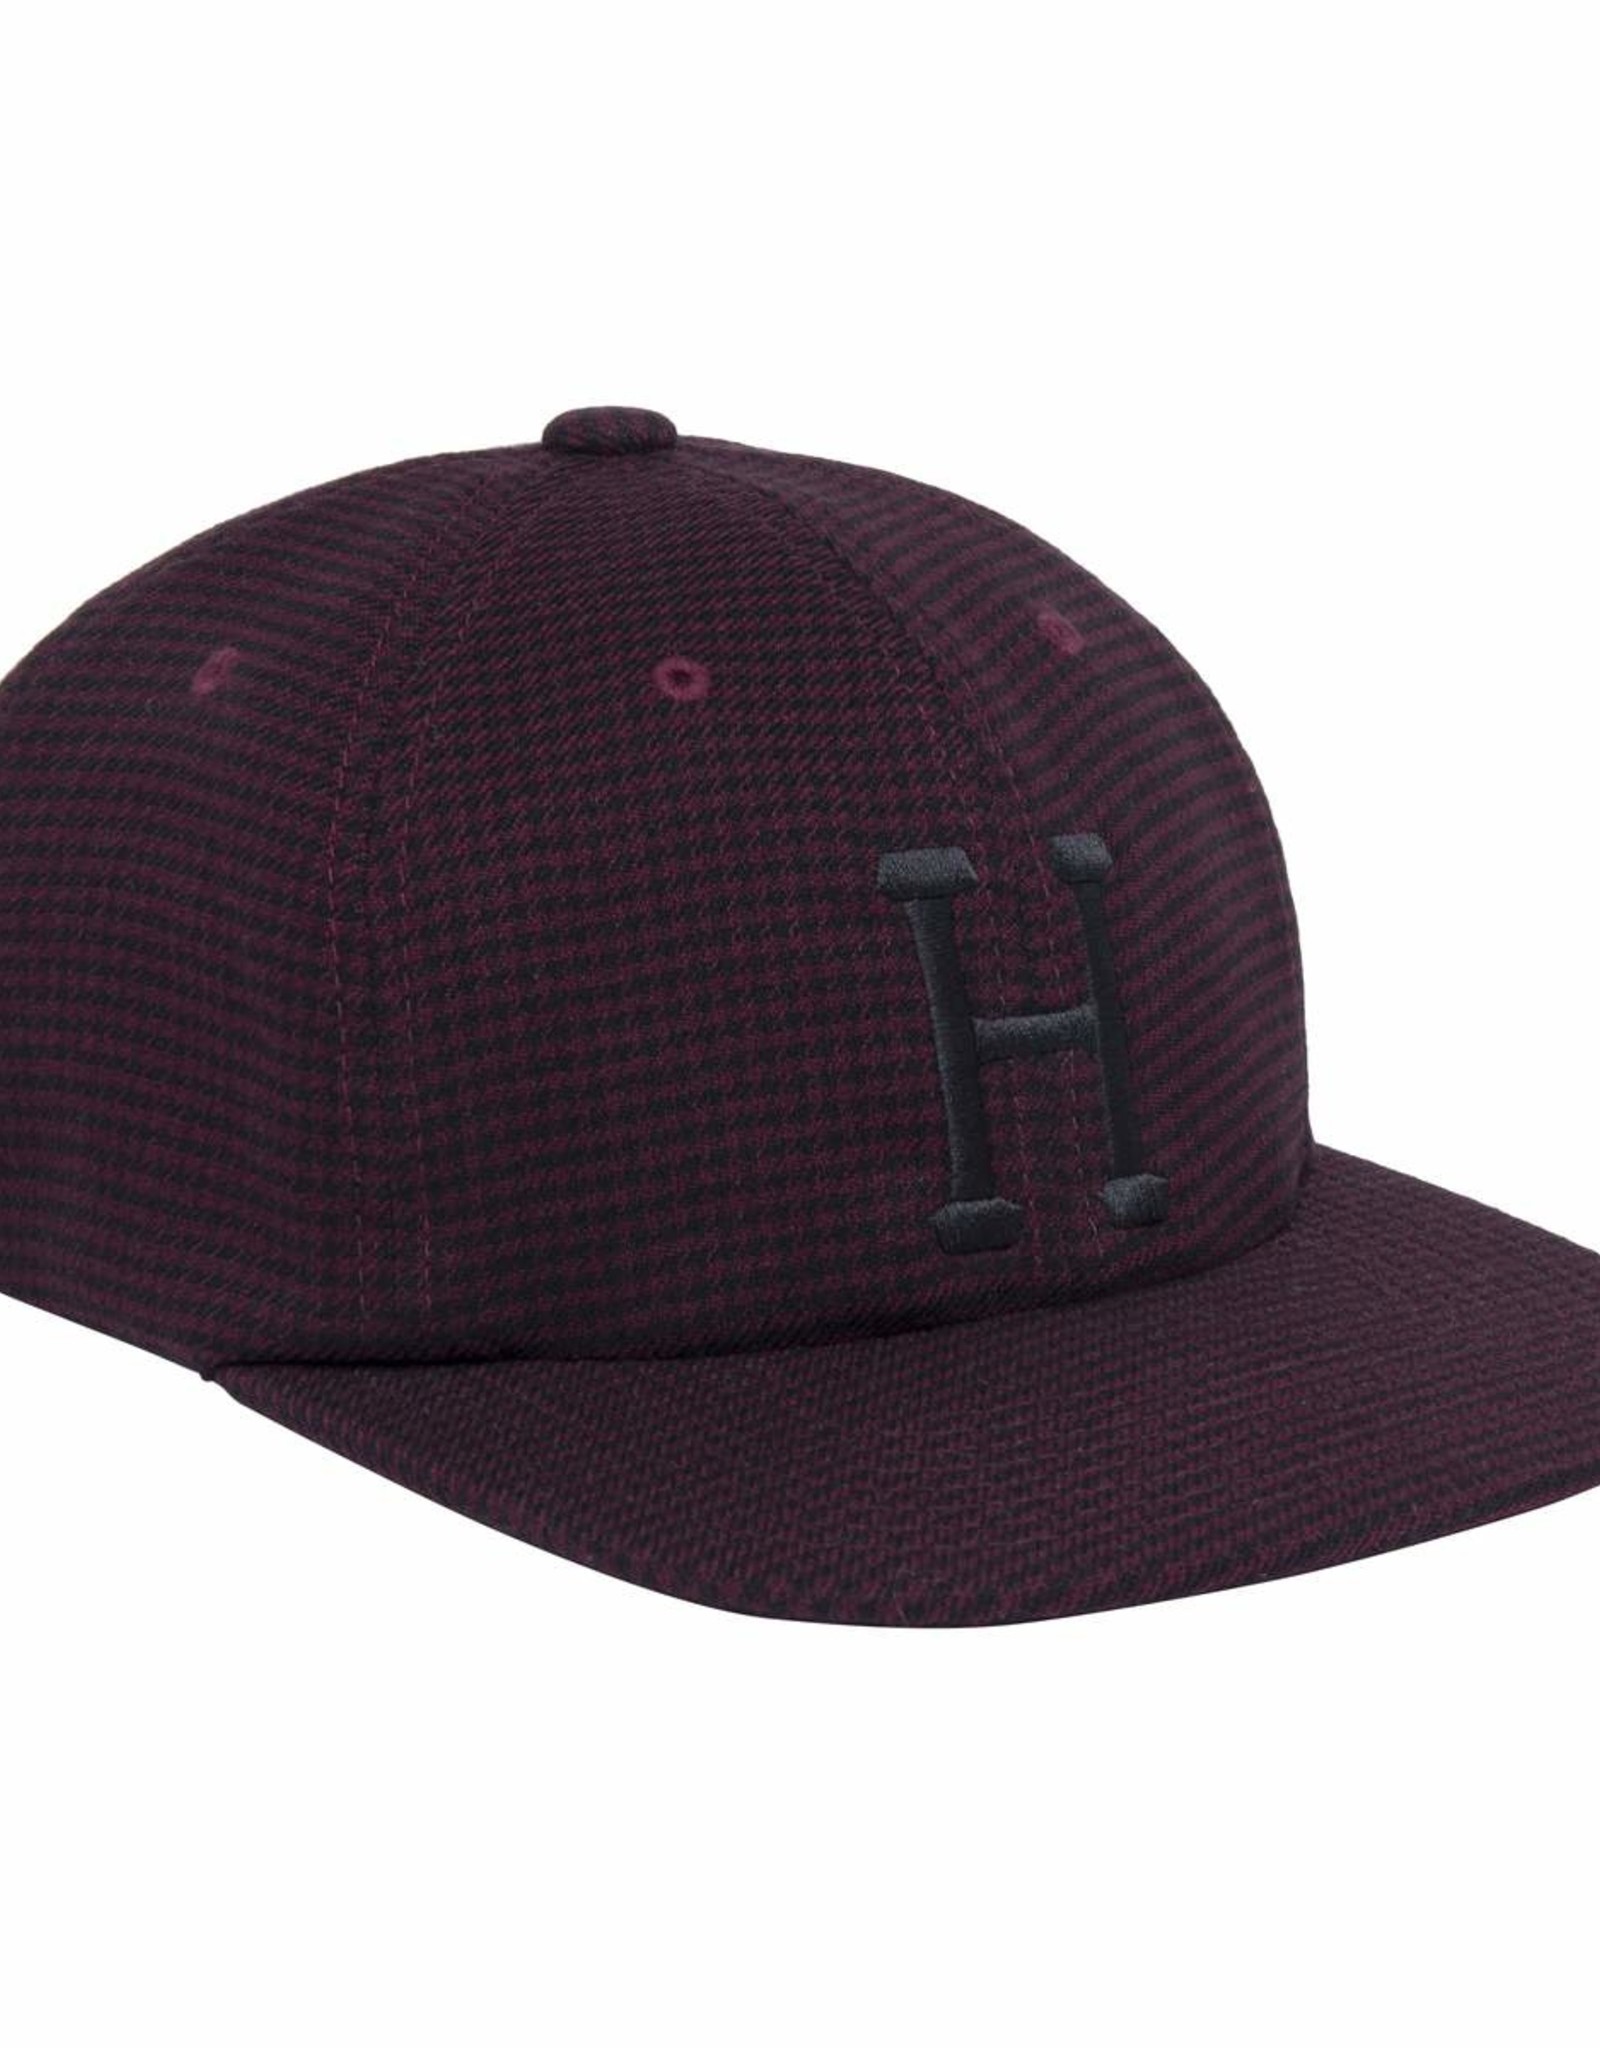 HUF CLASSIC H HOUNDSTOOTH 6 PANEL - BLOODSTONE